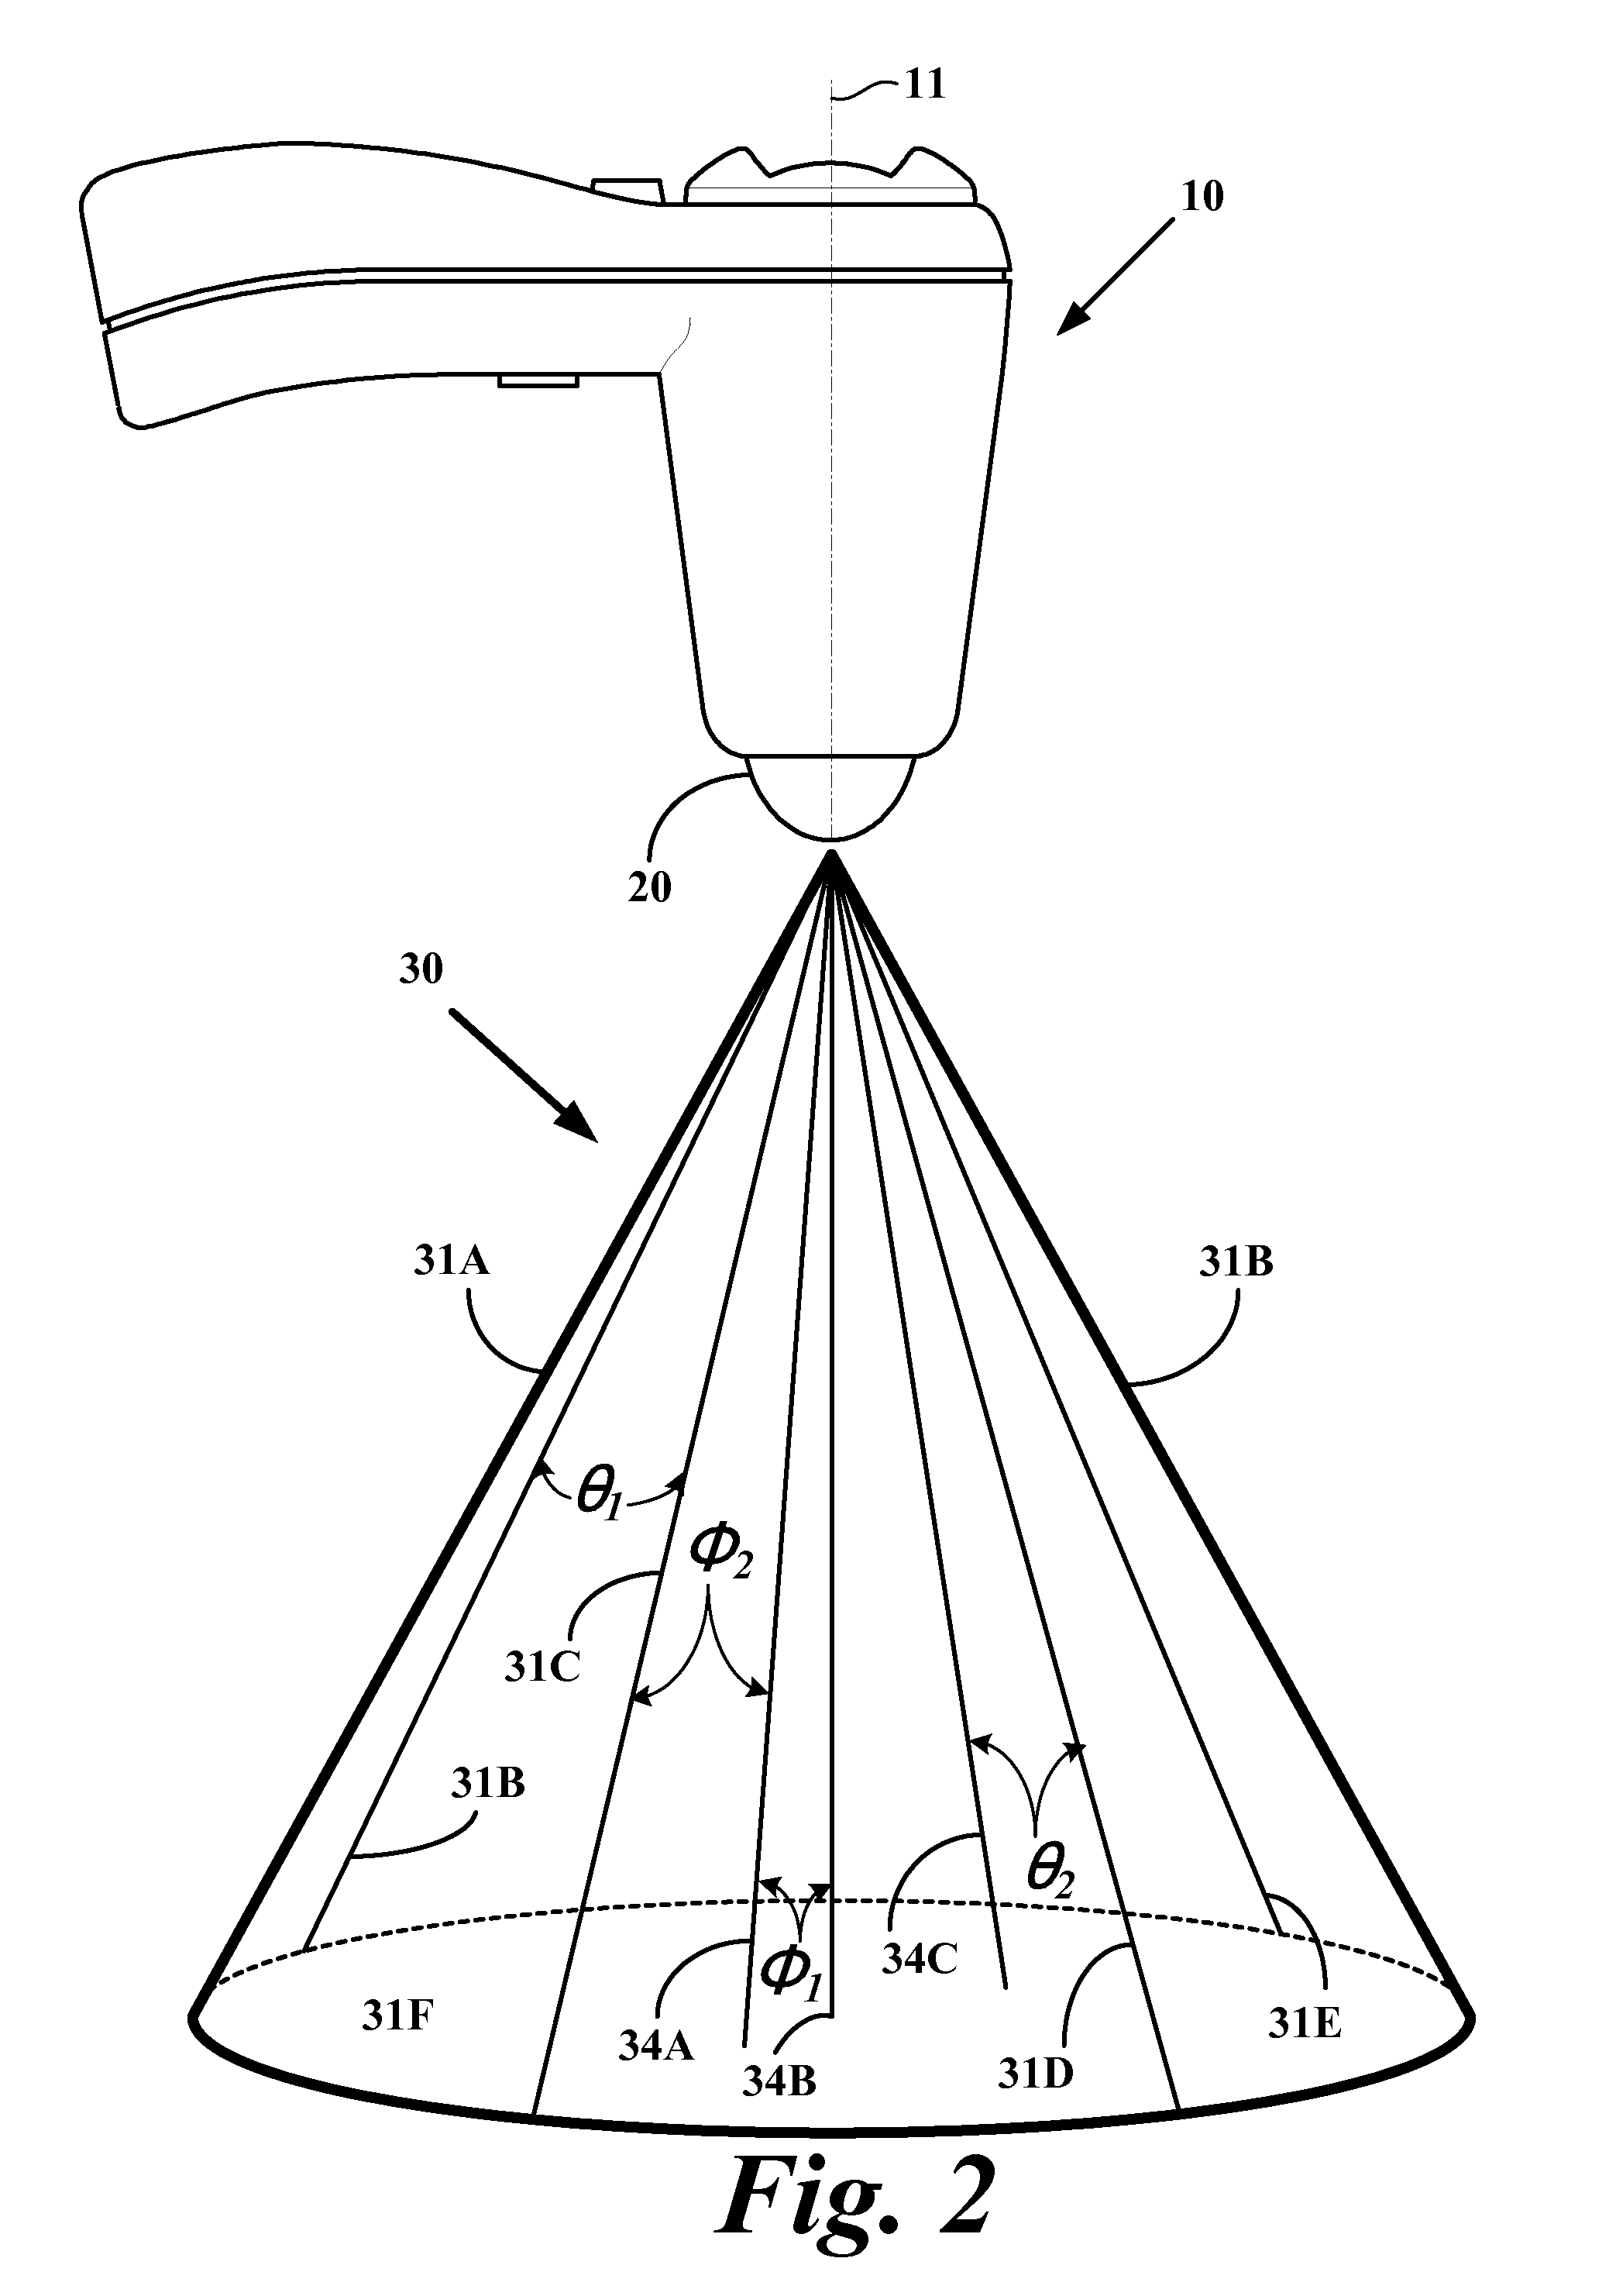 Ultrasound system and method for measuring bladder wall thickness and mass